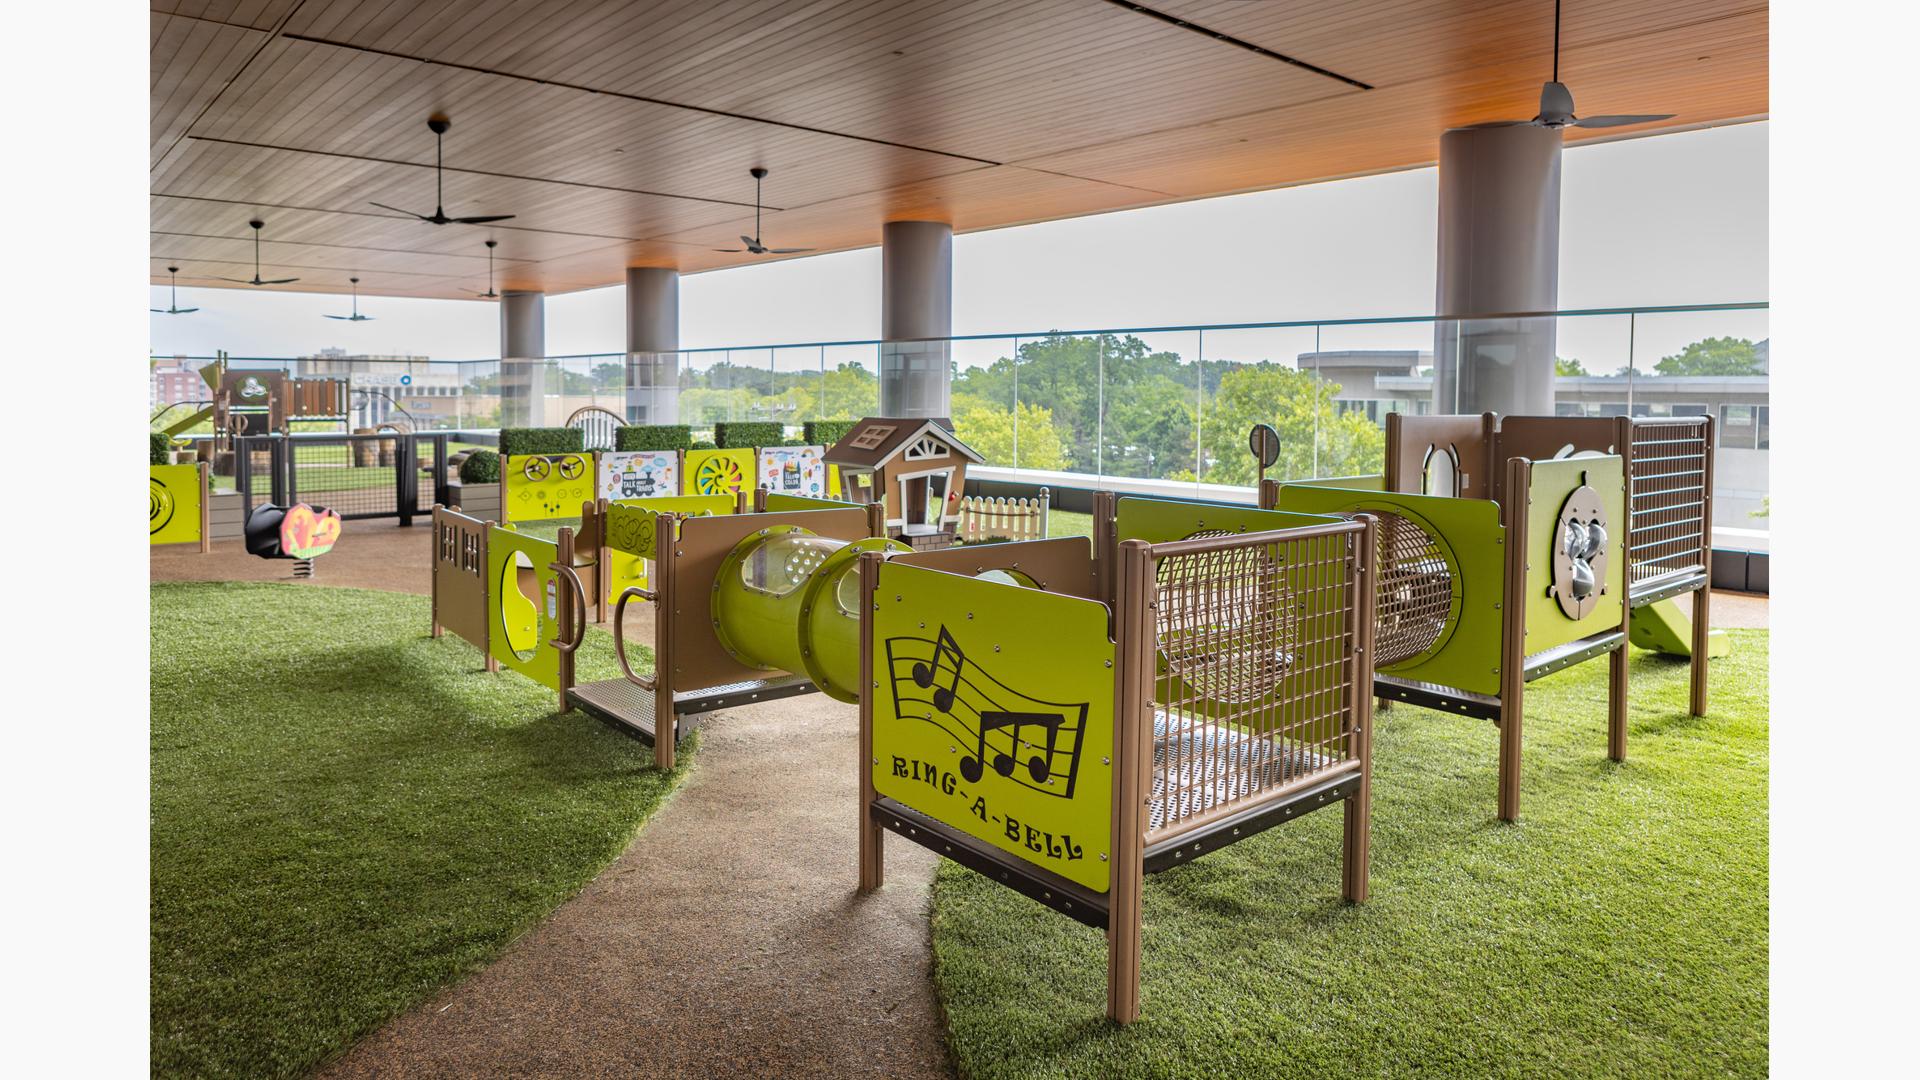 A covered balcony play area with multiple play structures and activities for toddler age children.